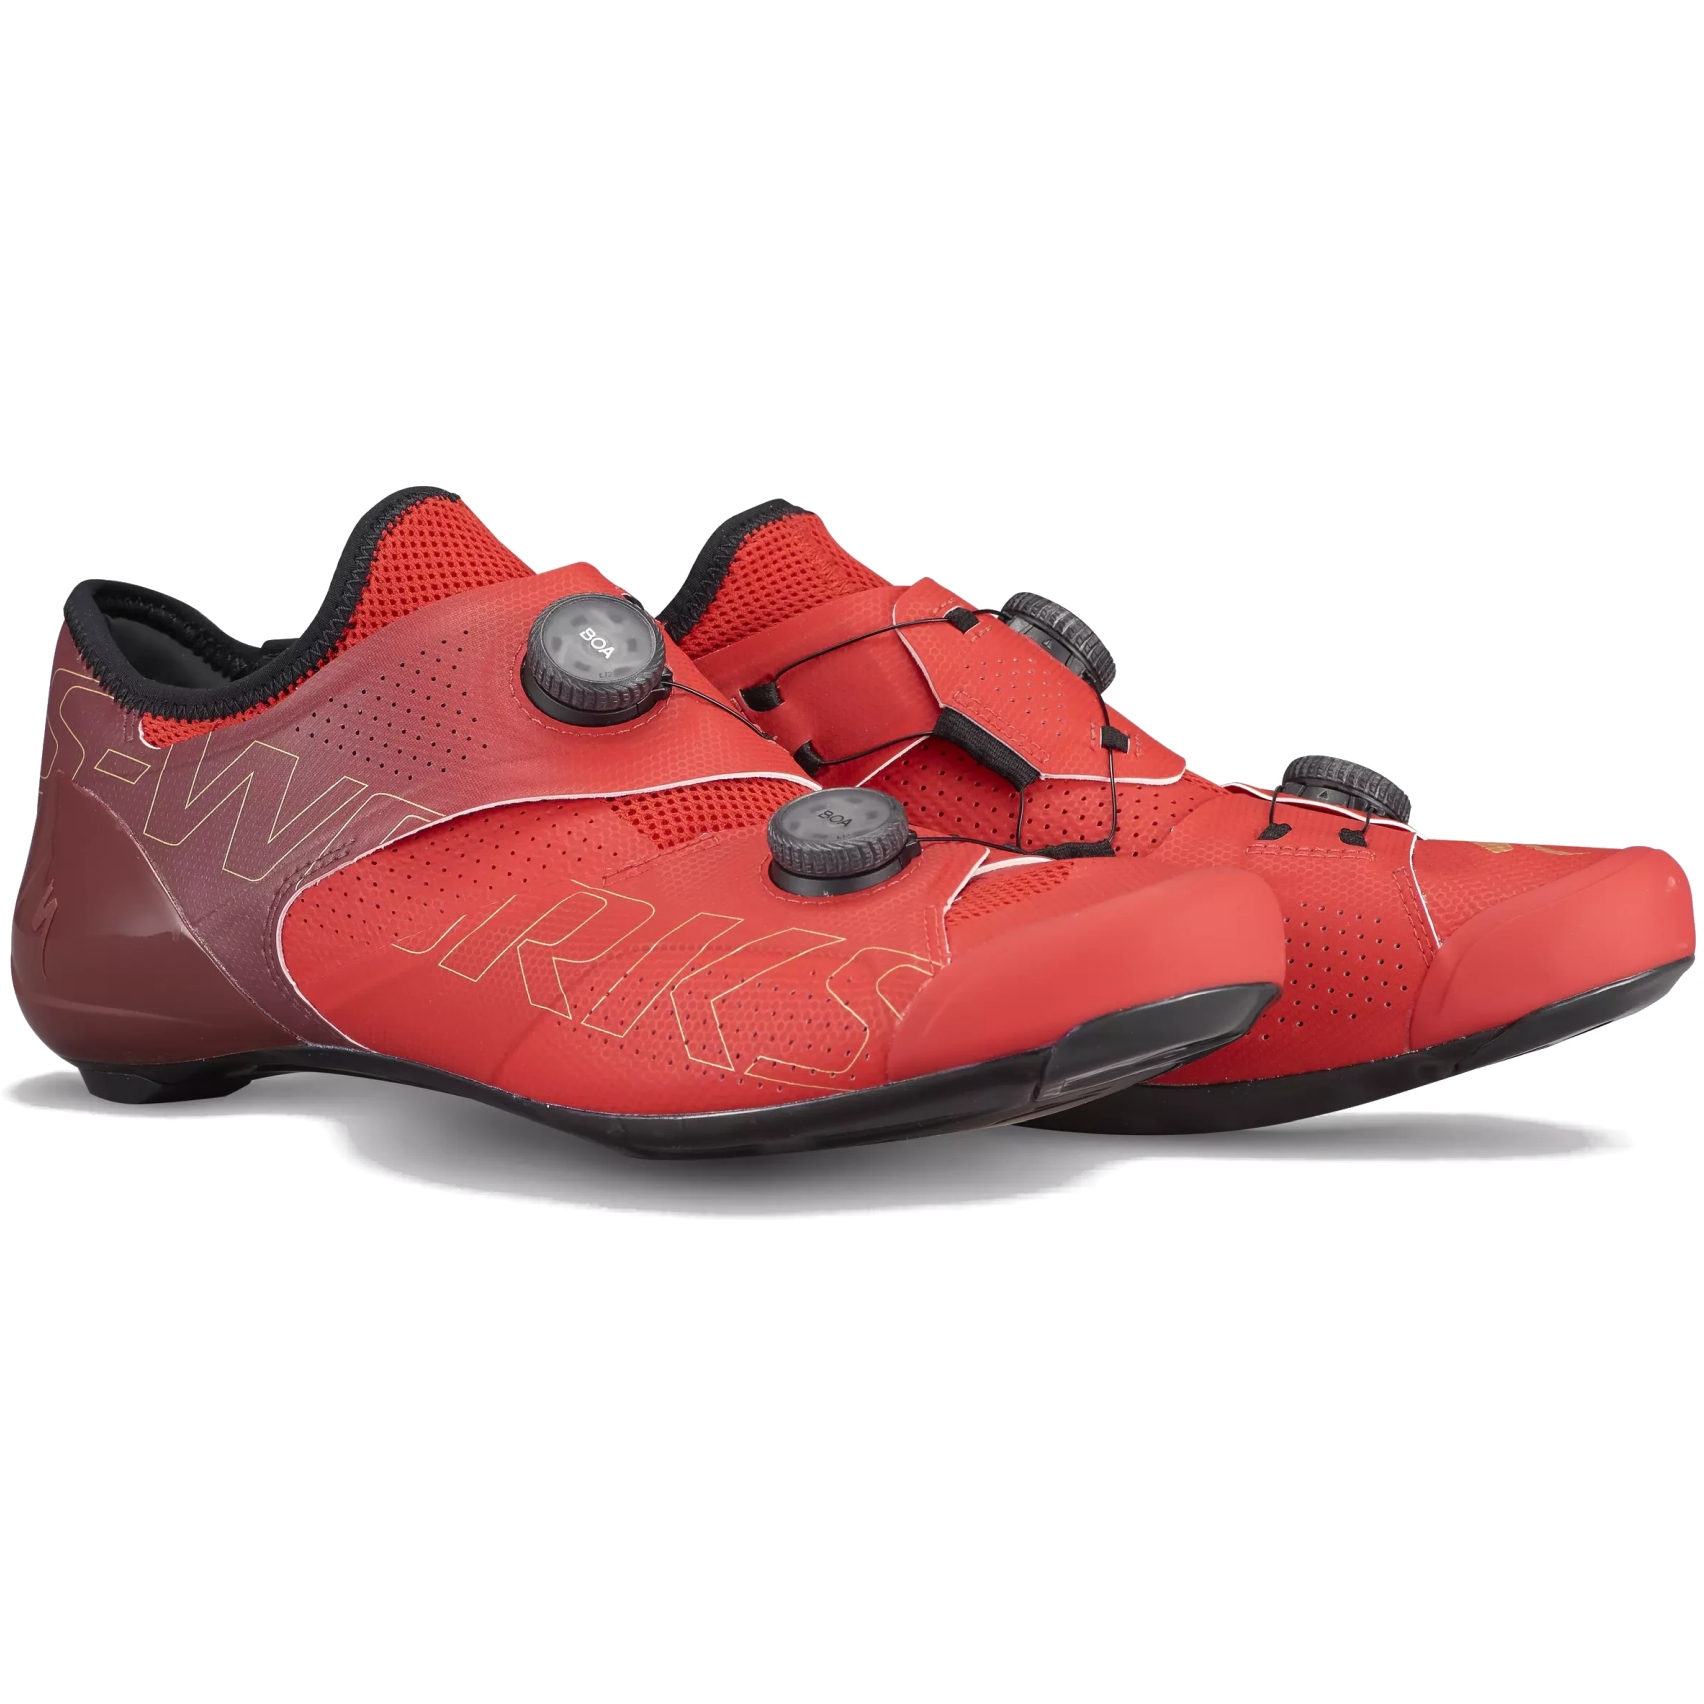 Photo produit de Specialized Chaussures Vélo Route - S-Works Ares - Flo Red/Maroon